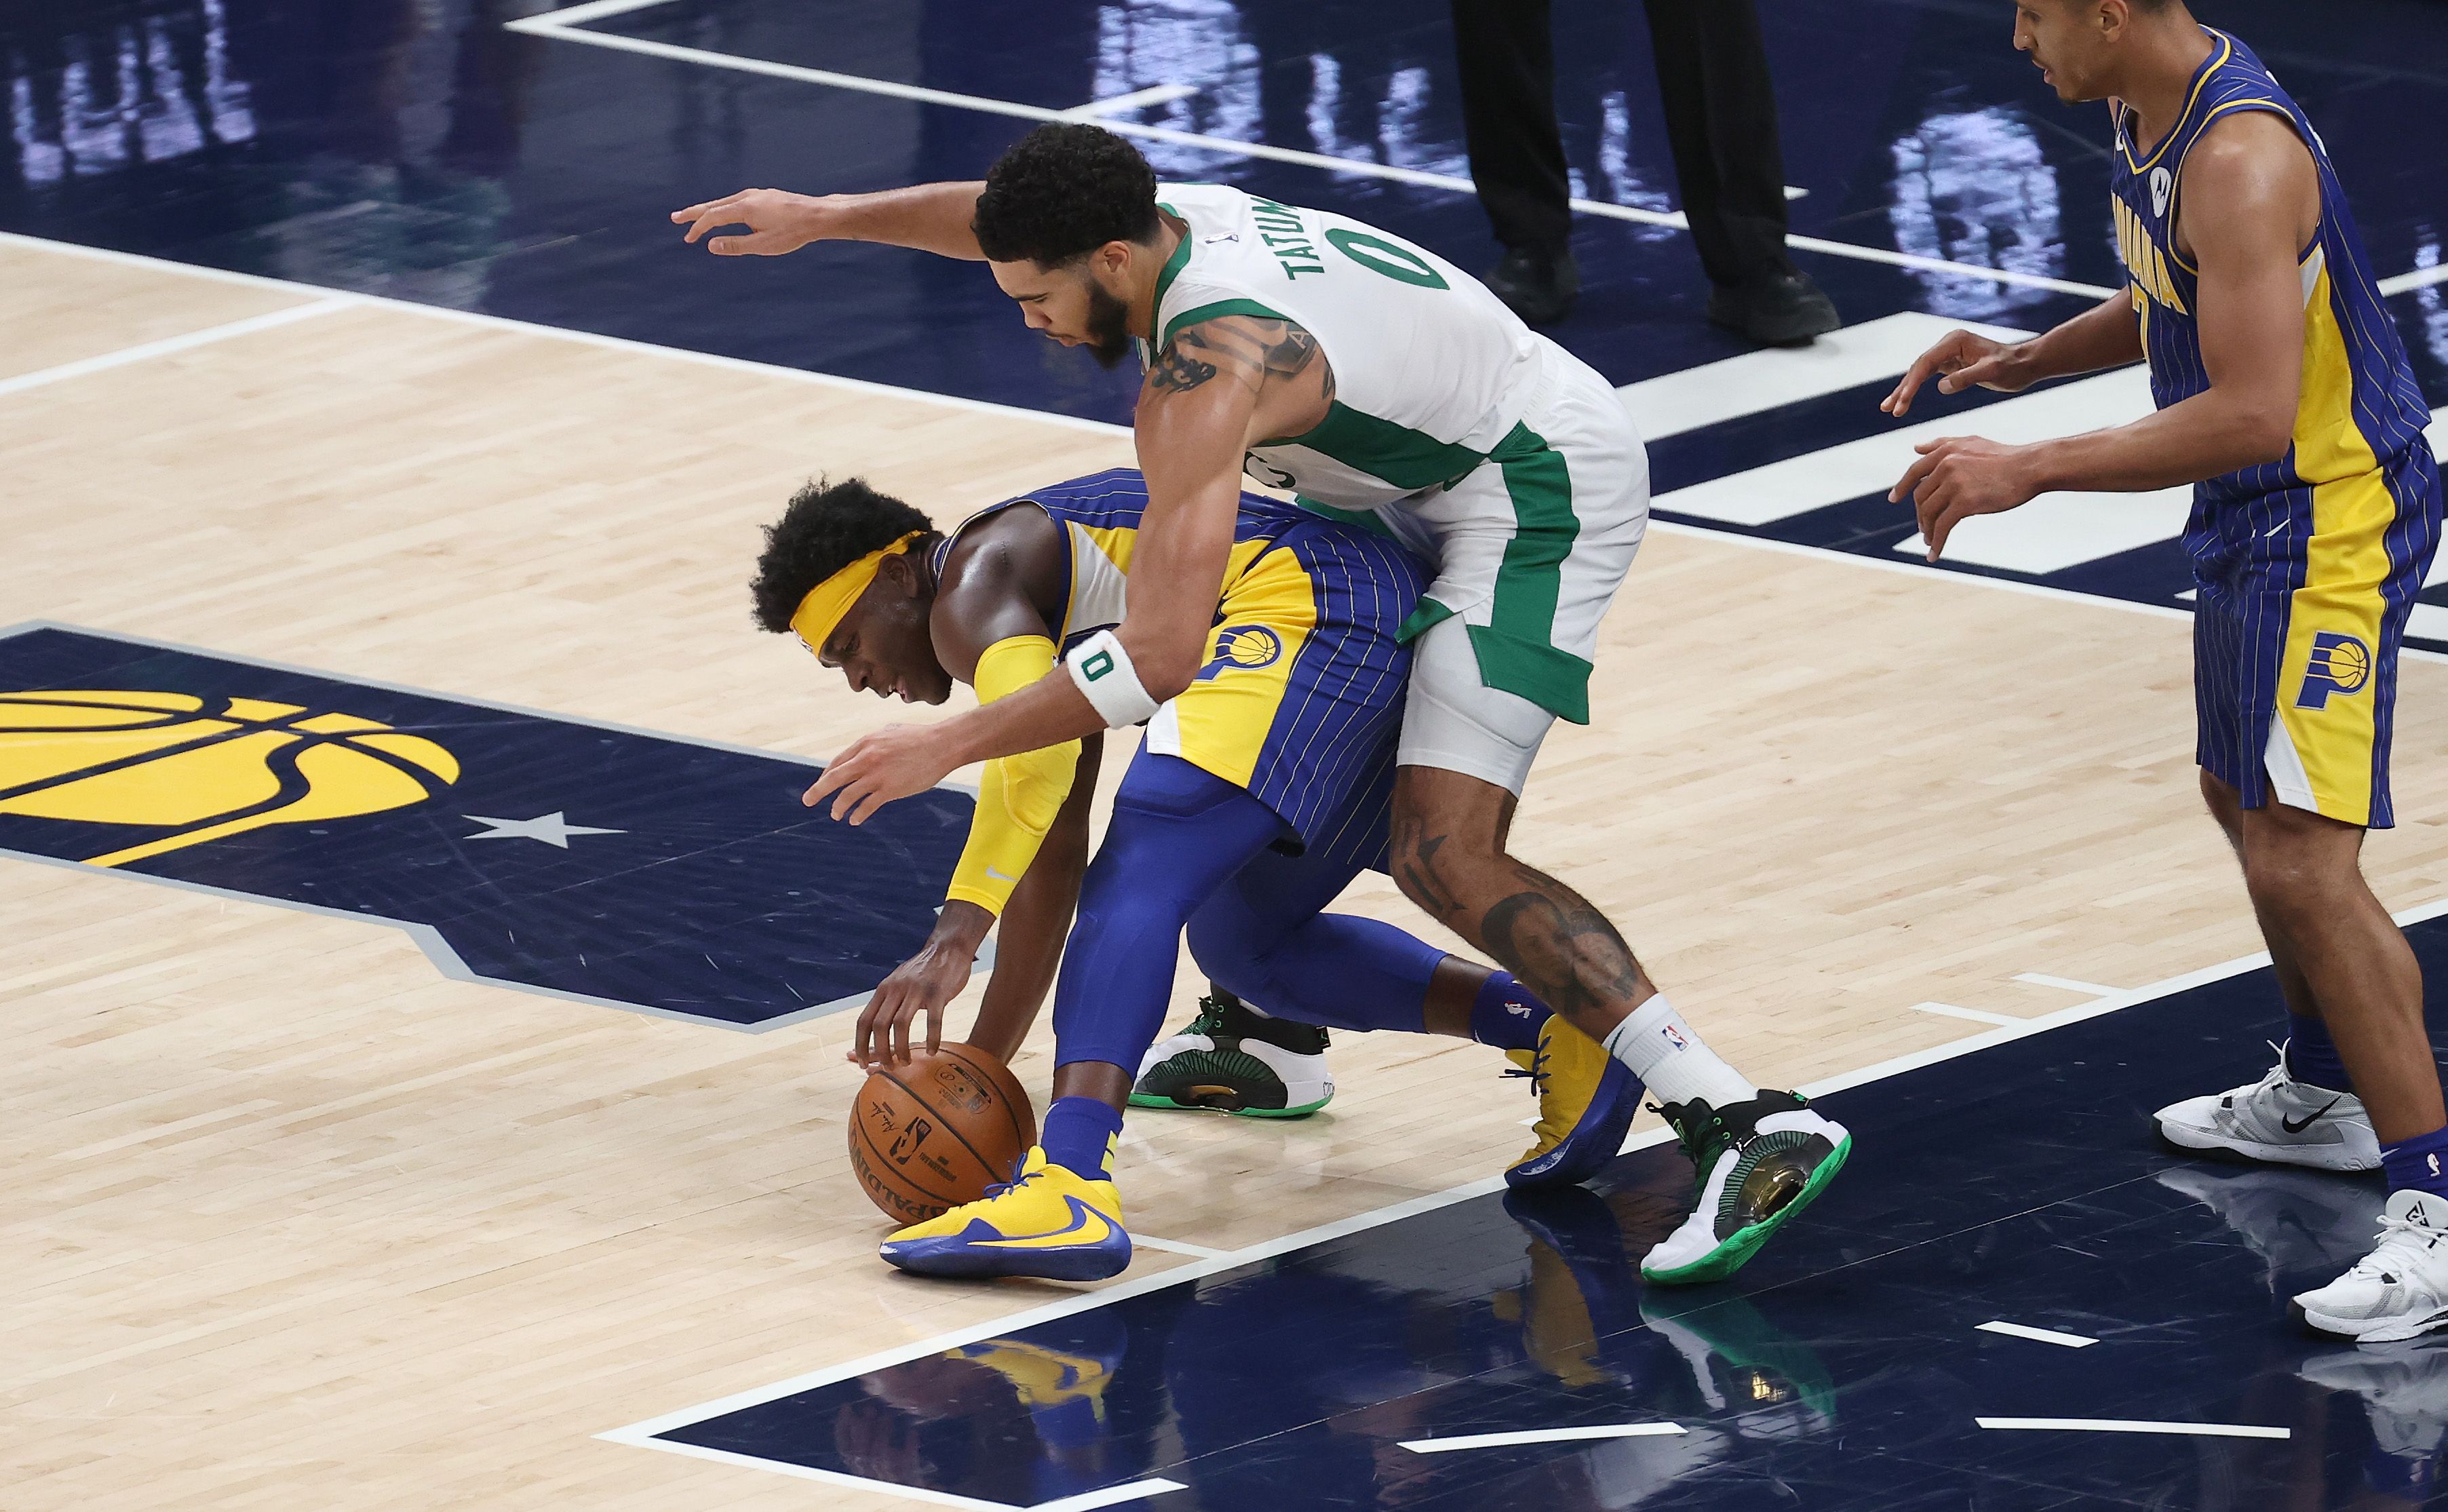 The Celtics and Pacers play basketball, poorly.